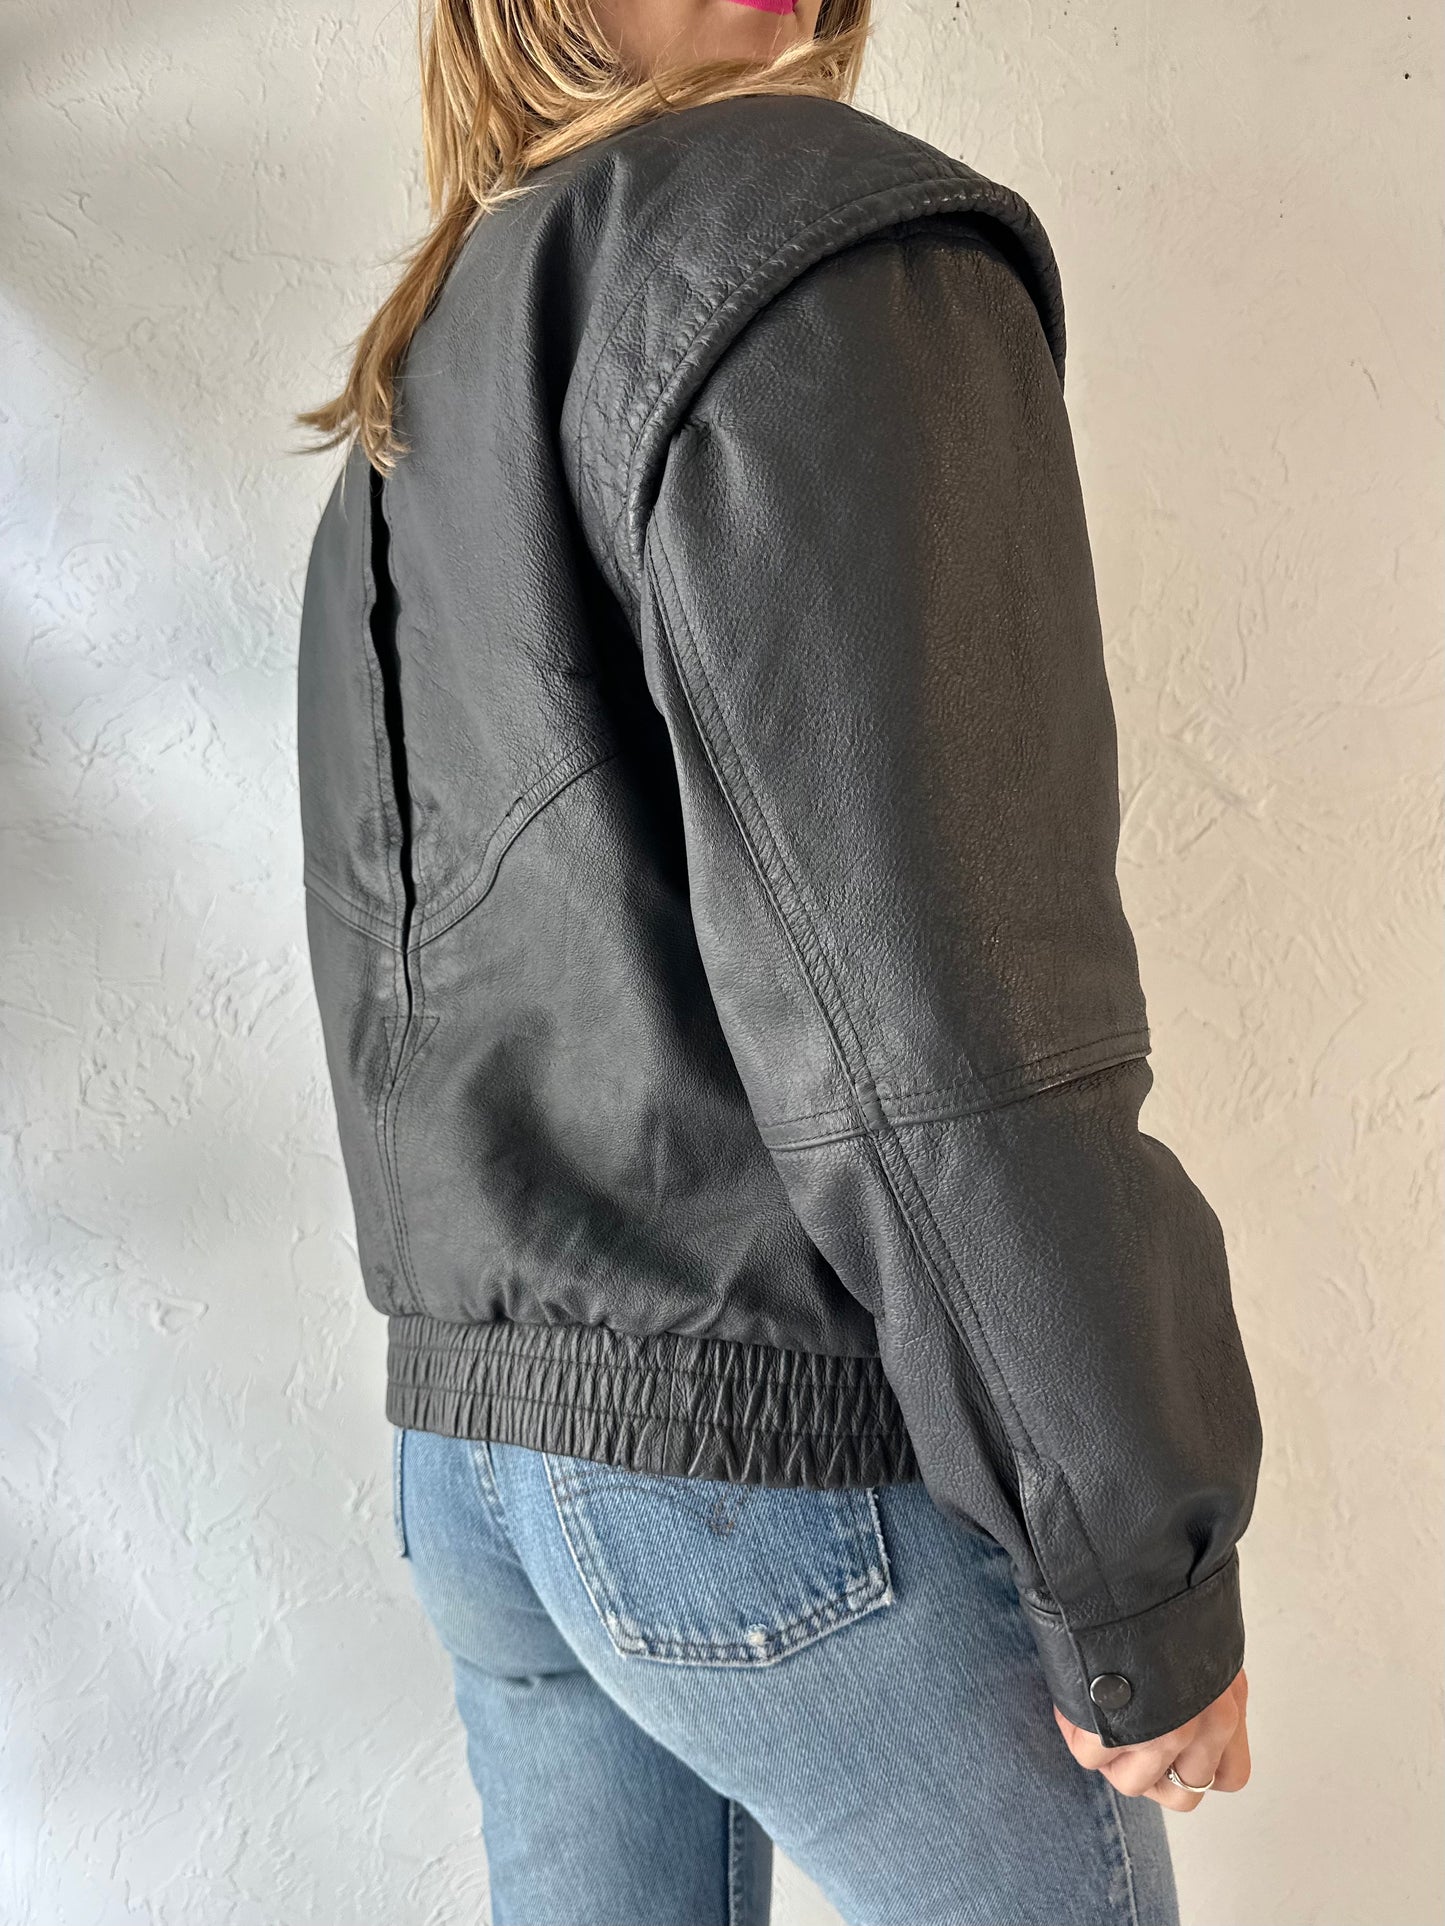 90s 'Phase 2' Faux Fur Lined Gray Leather Jacket / Small